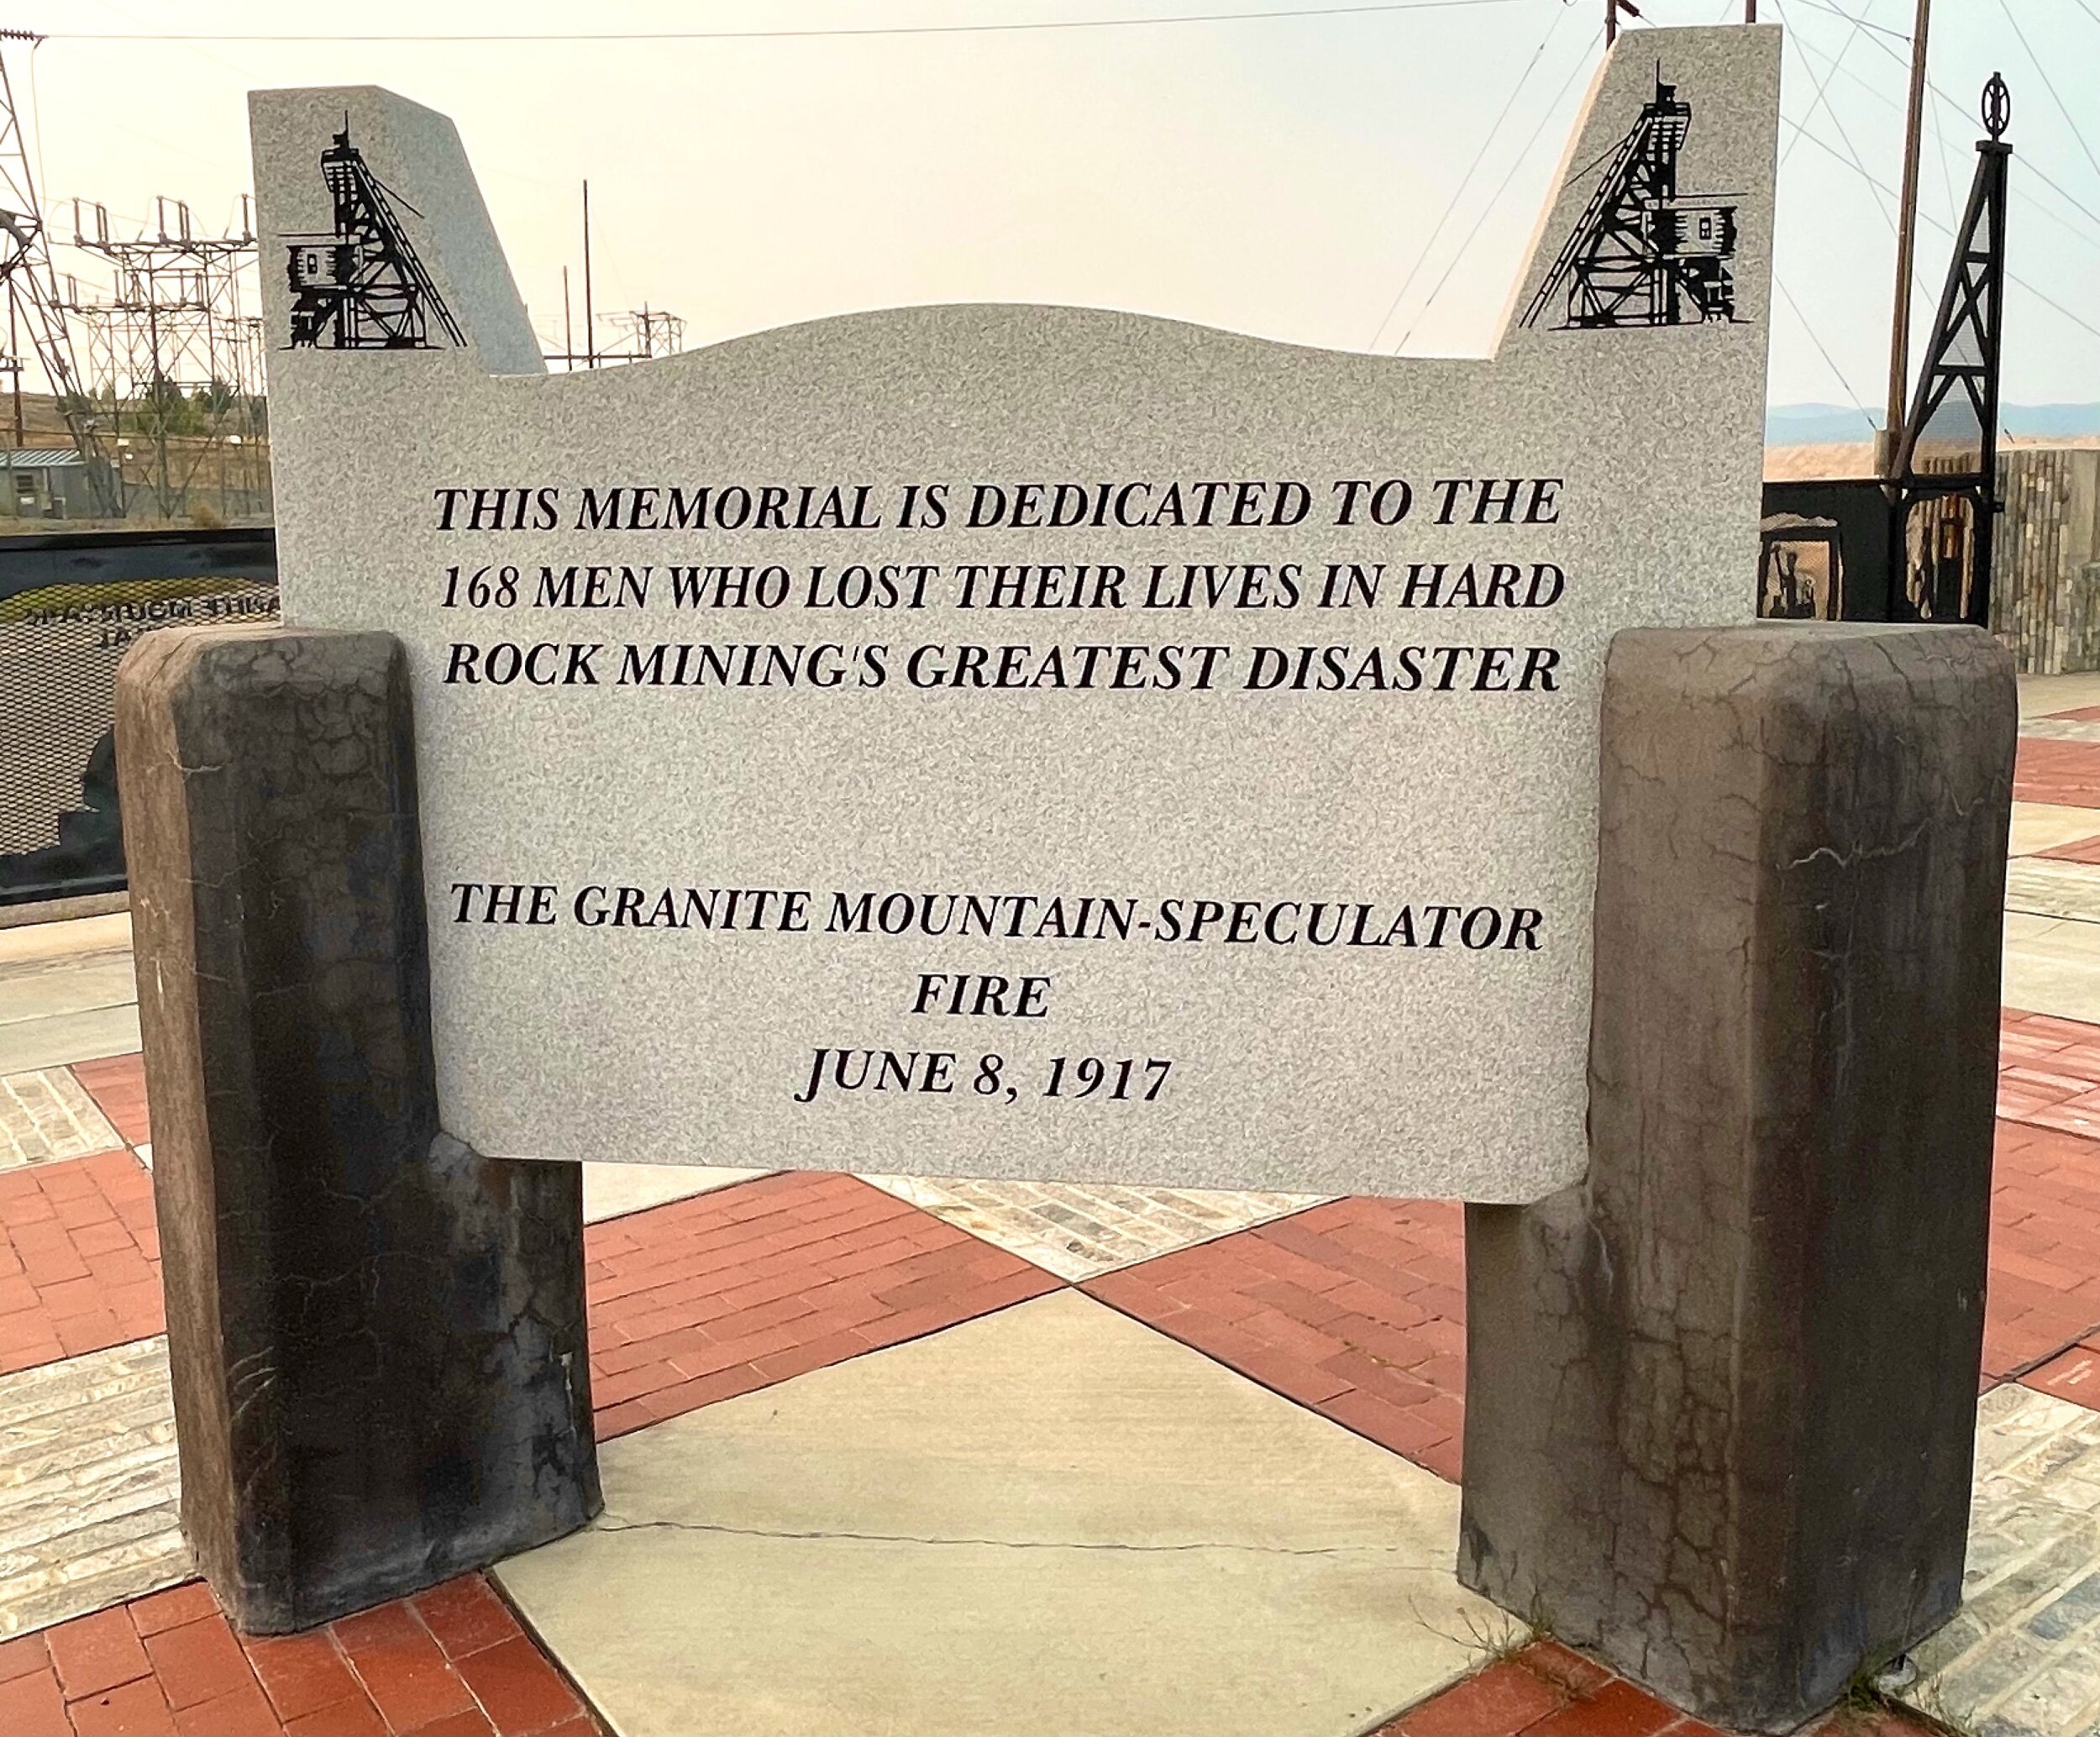  Butte is extremely proud of its mining heritage and honorably memorializes copper miners that died during the tragic  Granite Mountain/Speculator Mine disaster  of June 8, 1917. A fire started when a worker's lantern ignited a cable that led deep in